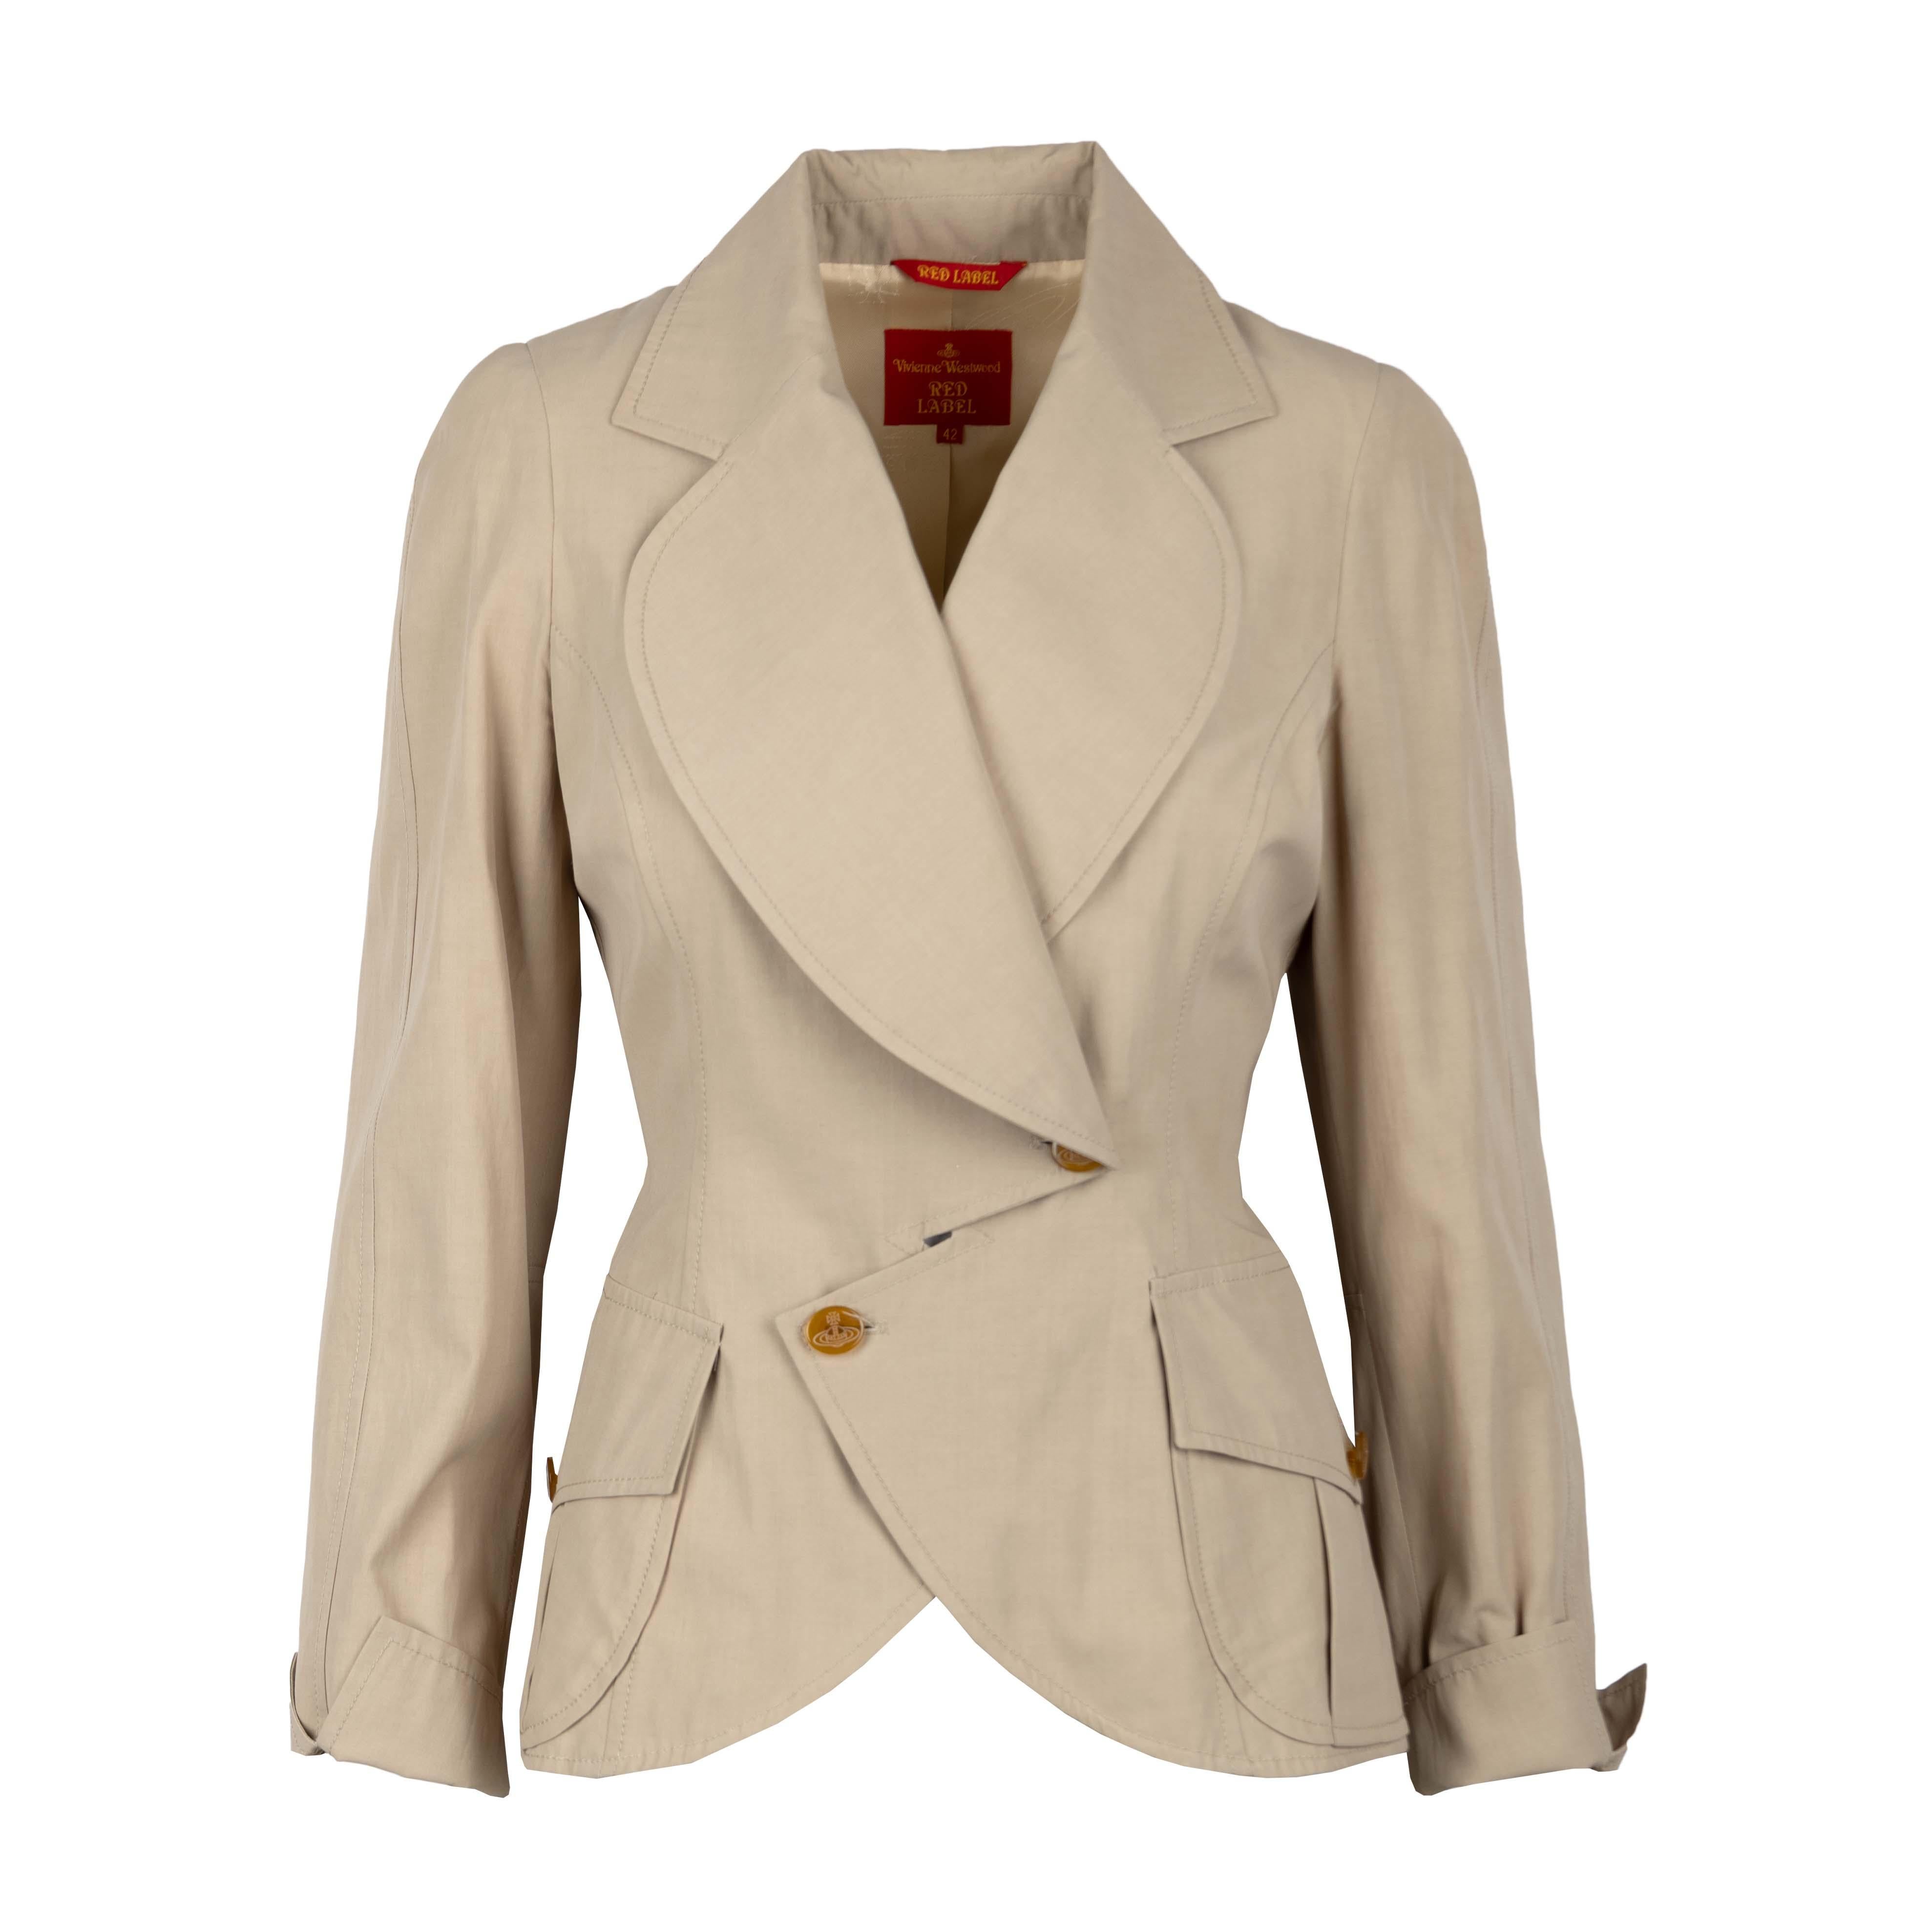 Vivienne Westwood Beige Skirt and Jacket Set - '00s In Excellent Condition For Sale In Milano, IT